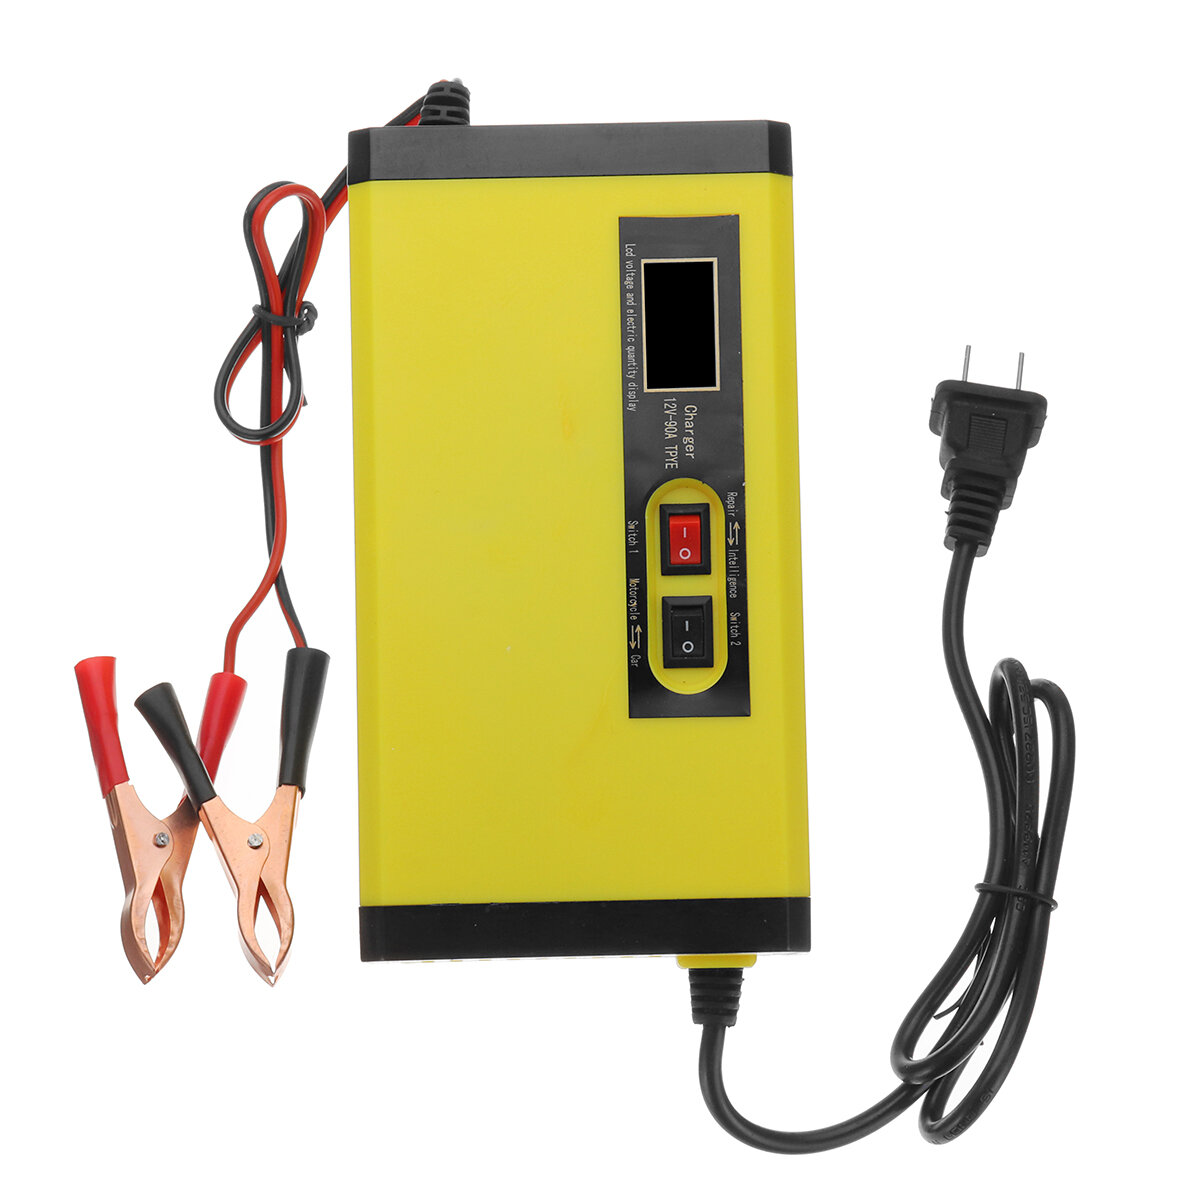 DC 12V 8A Pulse Repair Battery Charger For Car Motorcycle AGM GEL WET Lead Acid Battery LCD